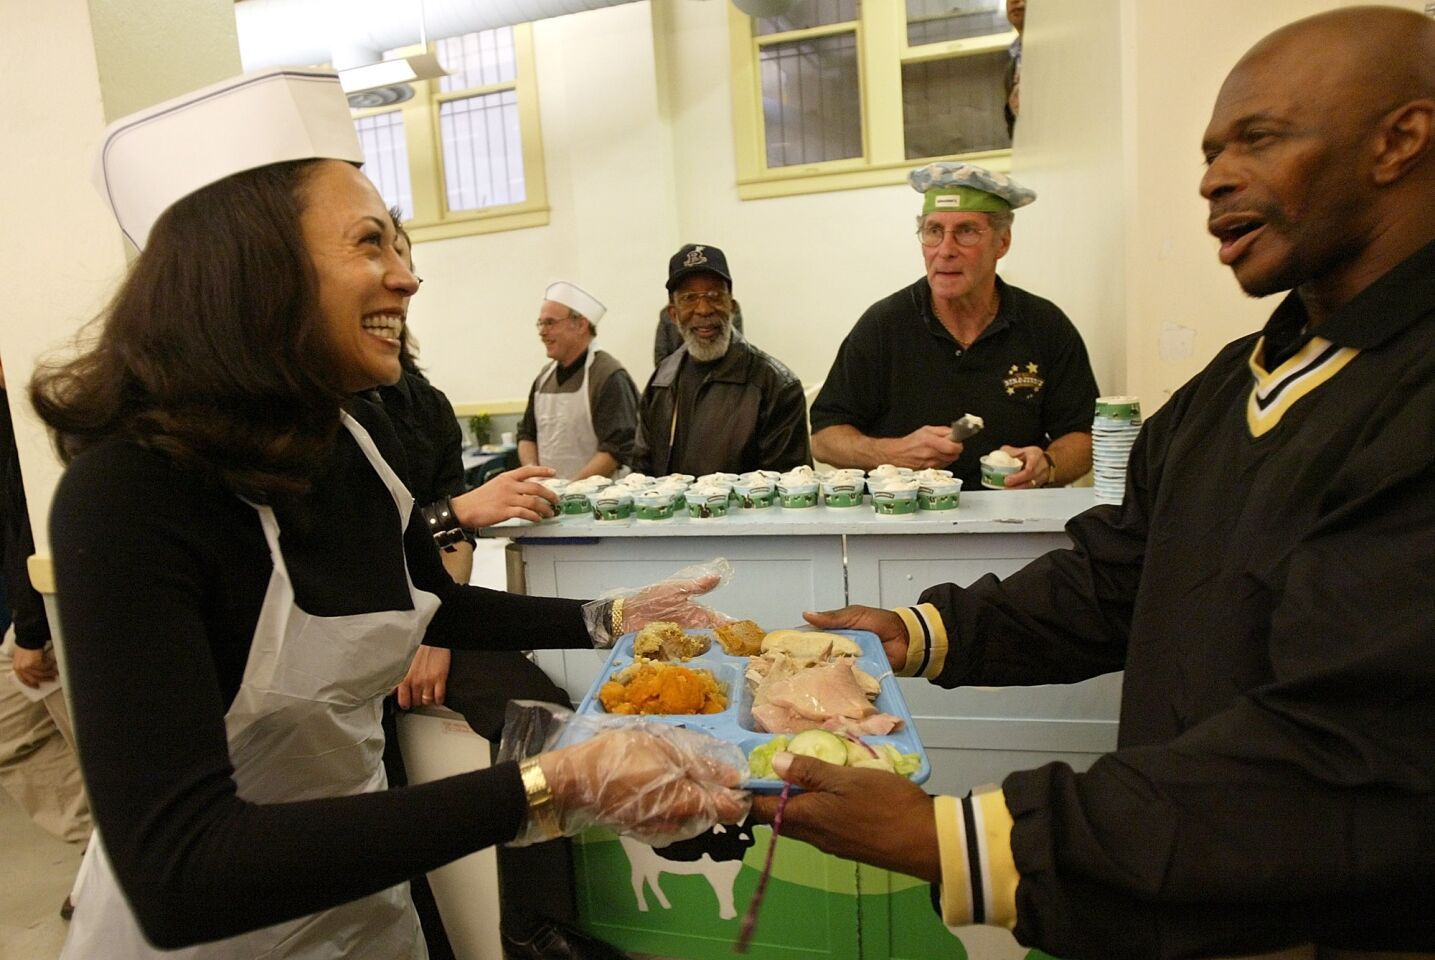 Nov. 27, 2003: San Francisco district attorney candidate Kamala Harris serves lunch while volunteering at Thanksgiving service.